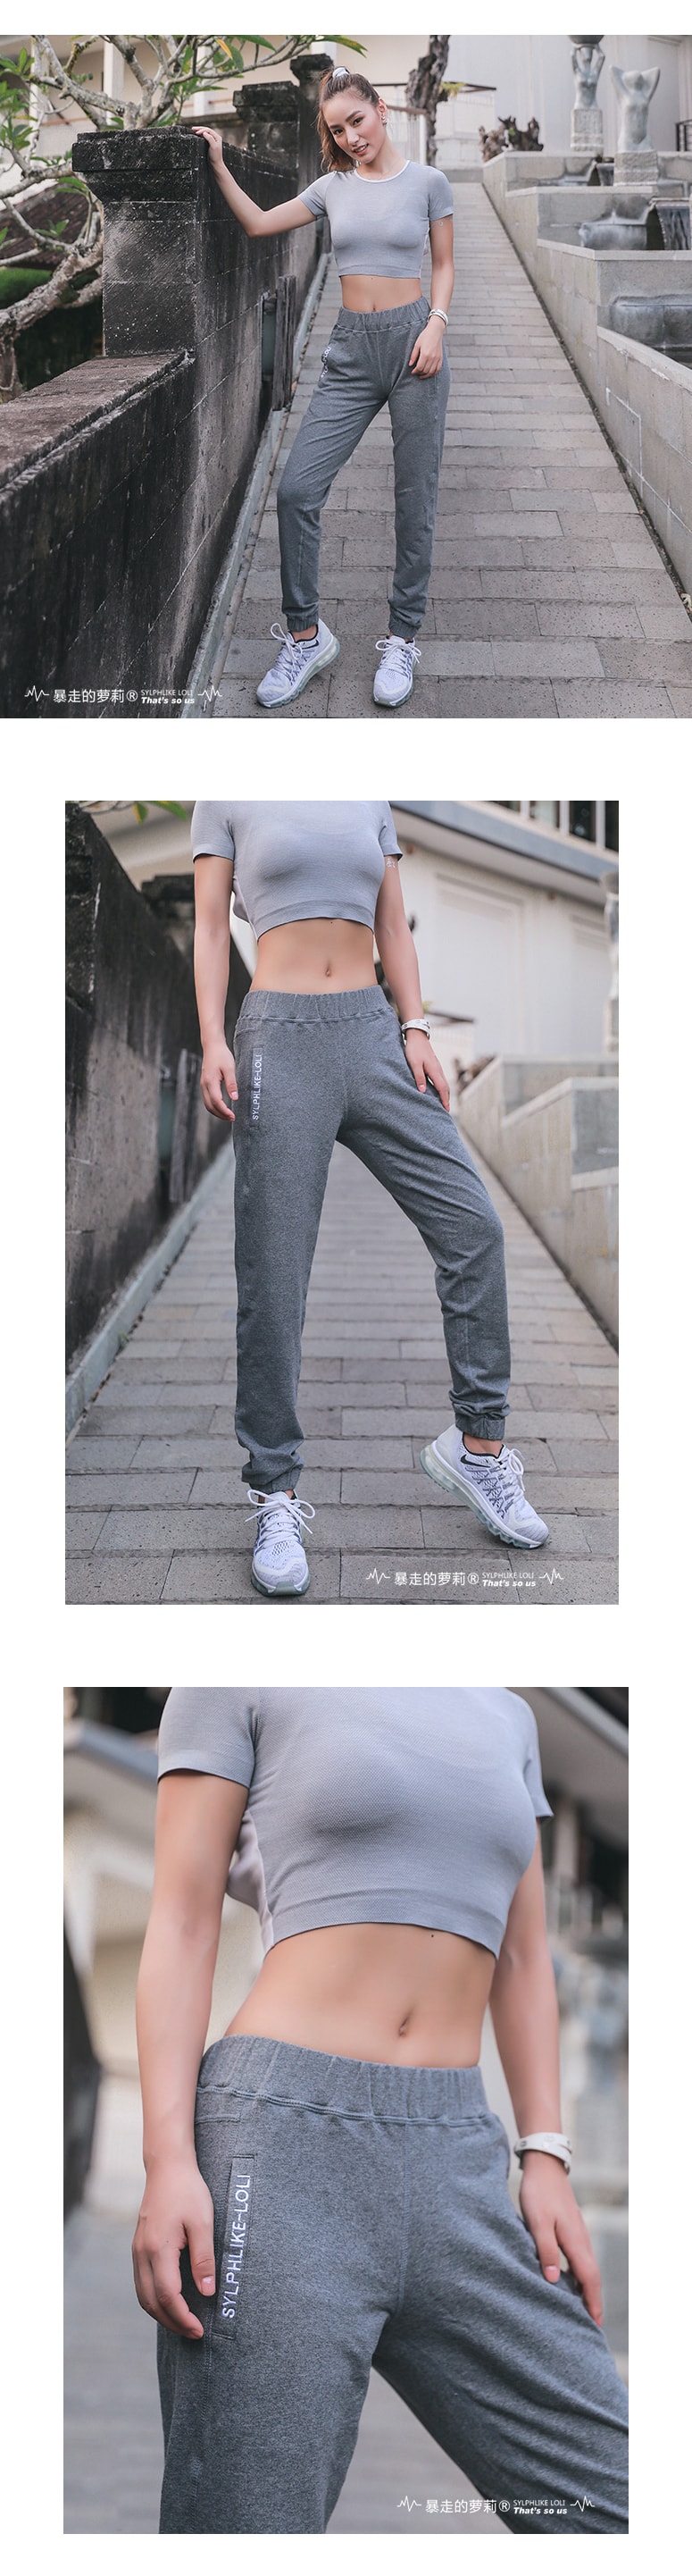 Sports Loose Leisure Pants For Running Yoga Fitness Train Outdoor/Black#/M